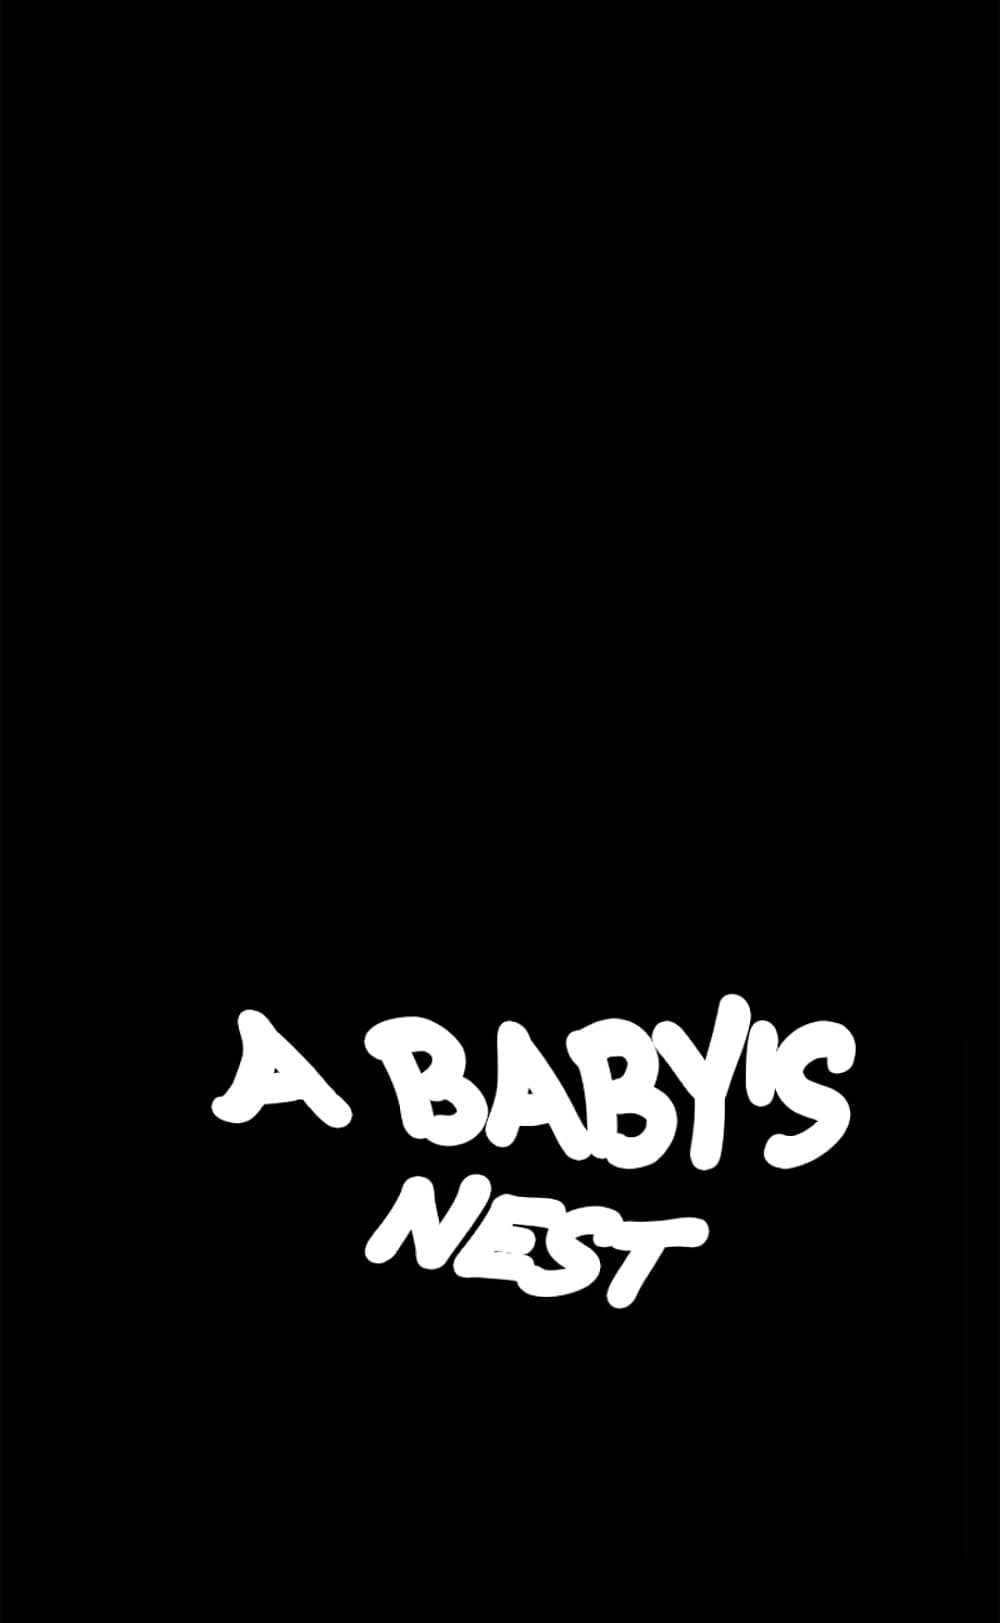 A Baby's Nest 8-8